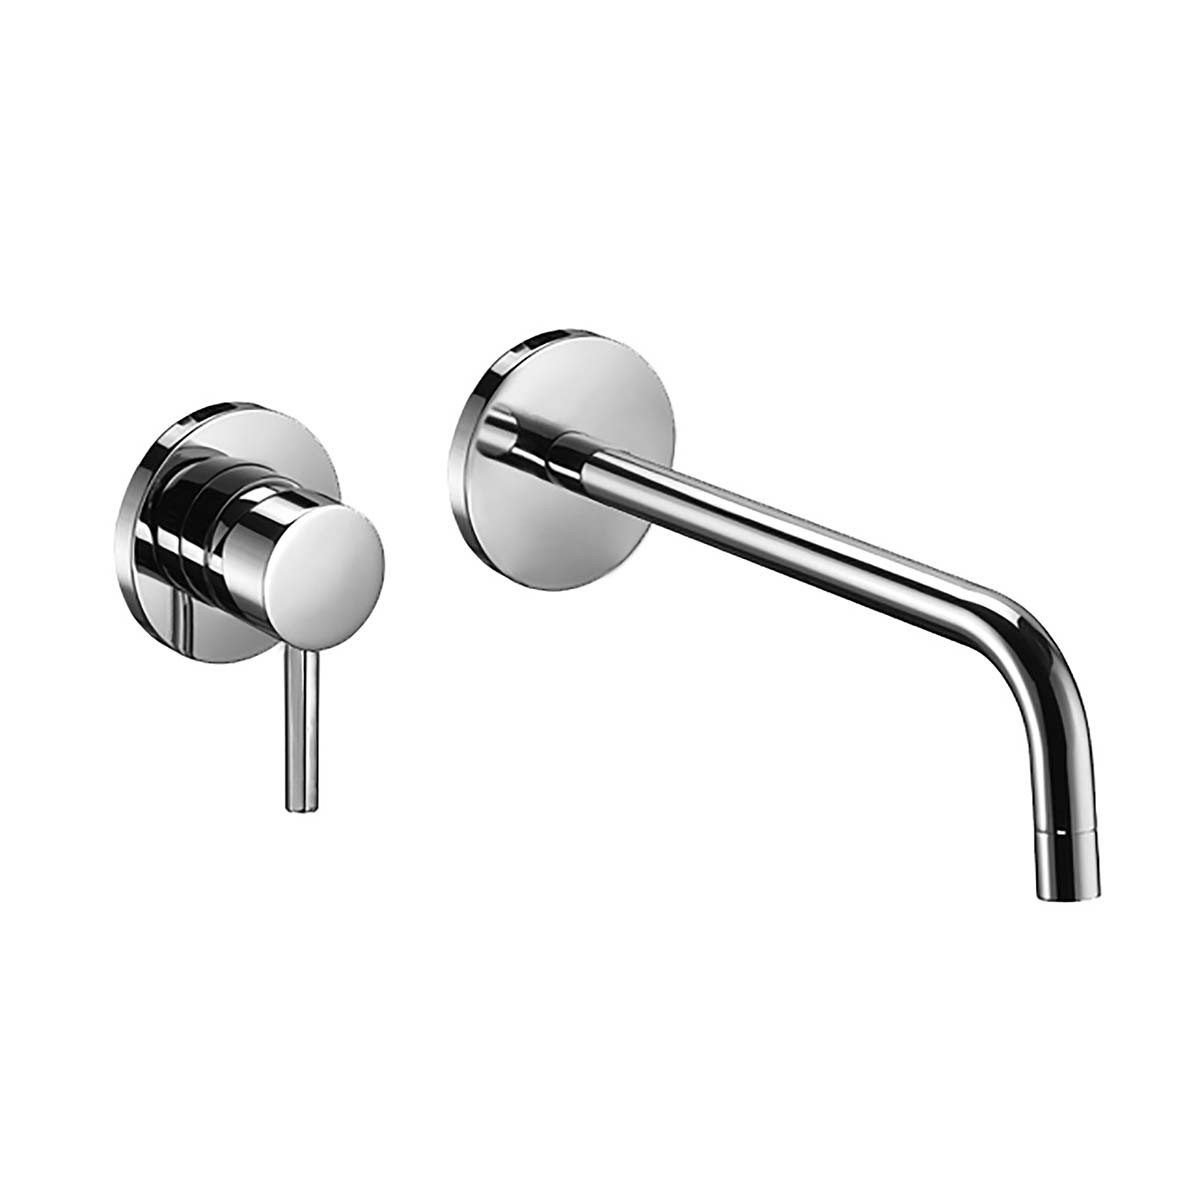 WS Bath Collections Birillo BI 10170 Concealed Single Lever